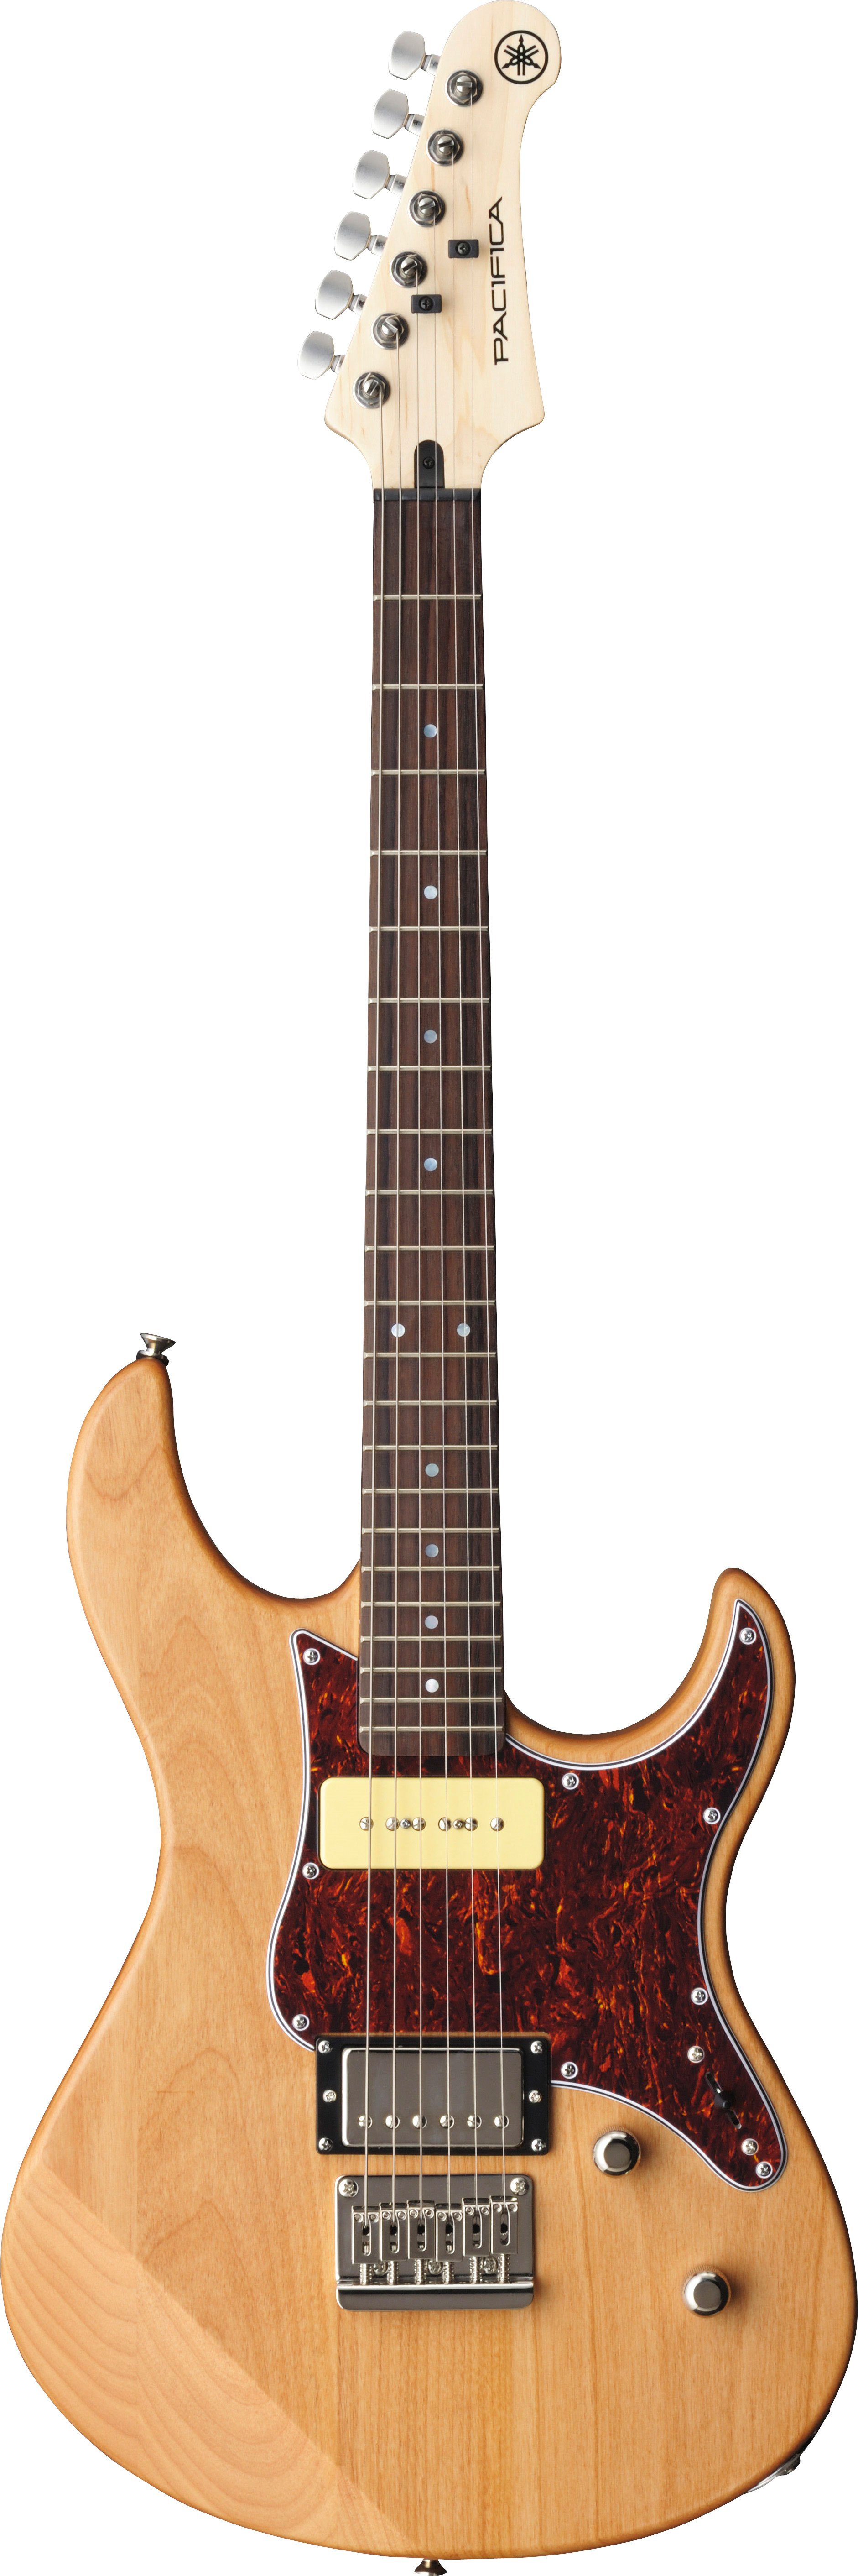 Yamaha Pacifica Pac311h - Natural Satin - E-Gitarre in Str-Form - Variation 4